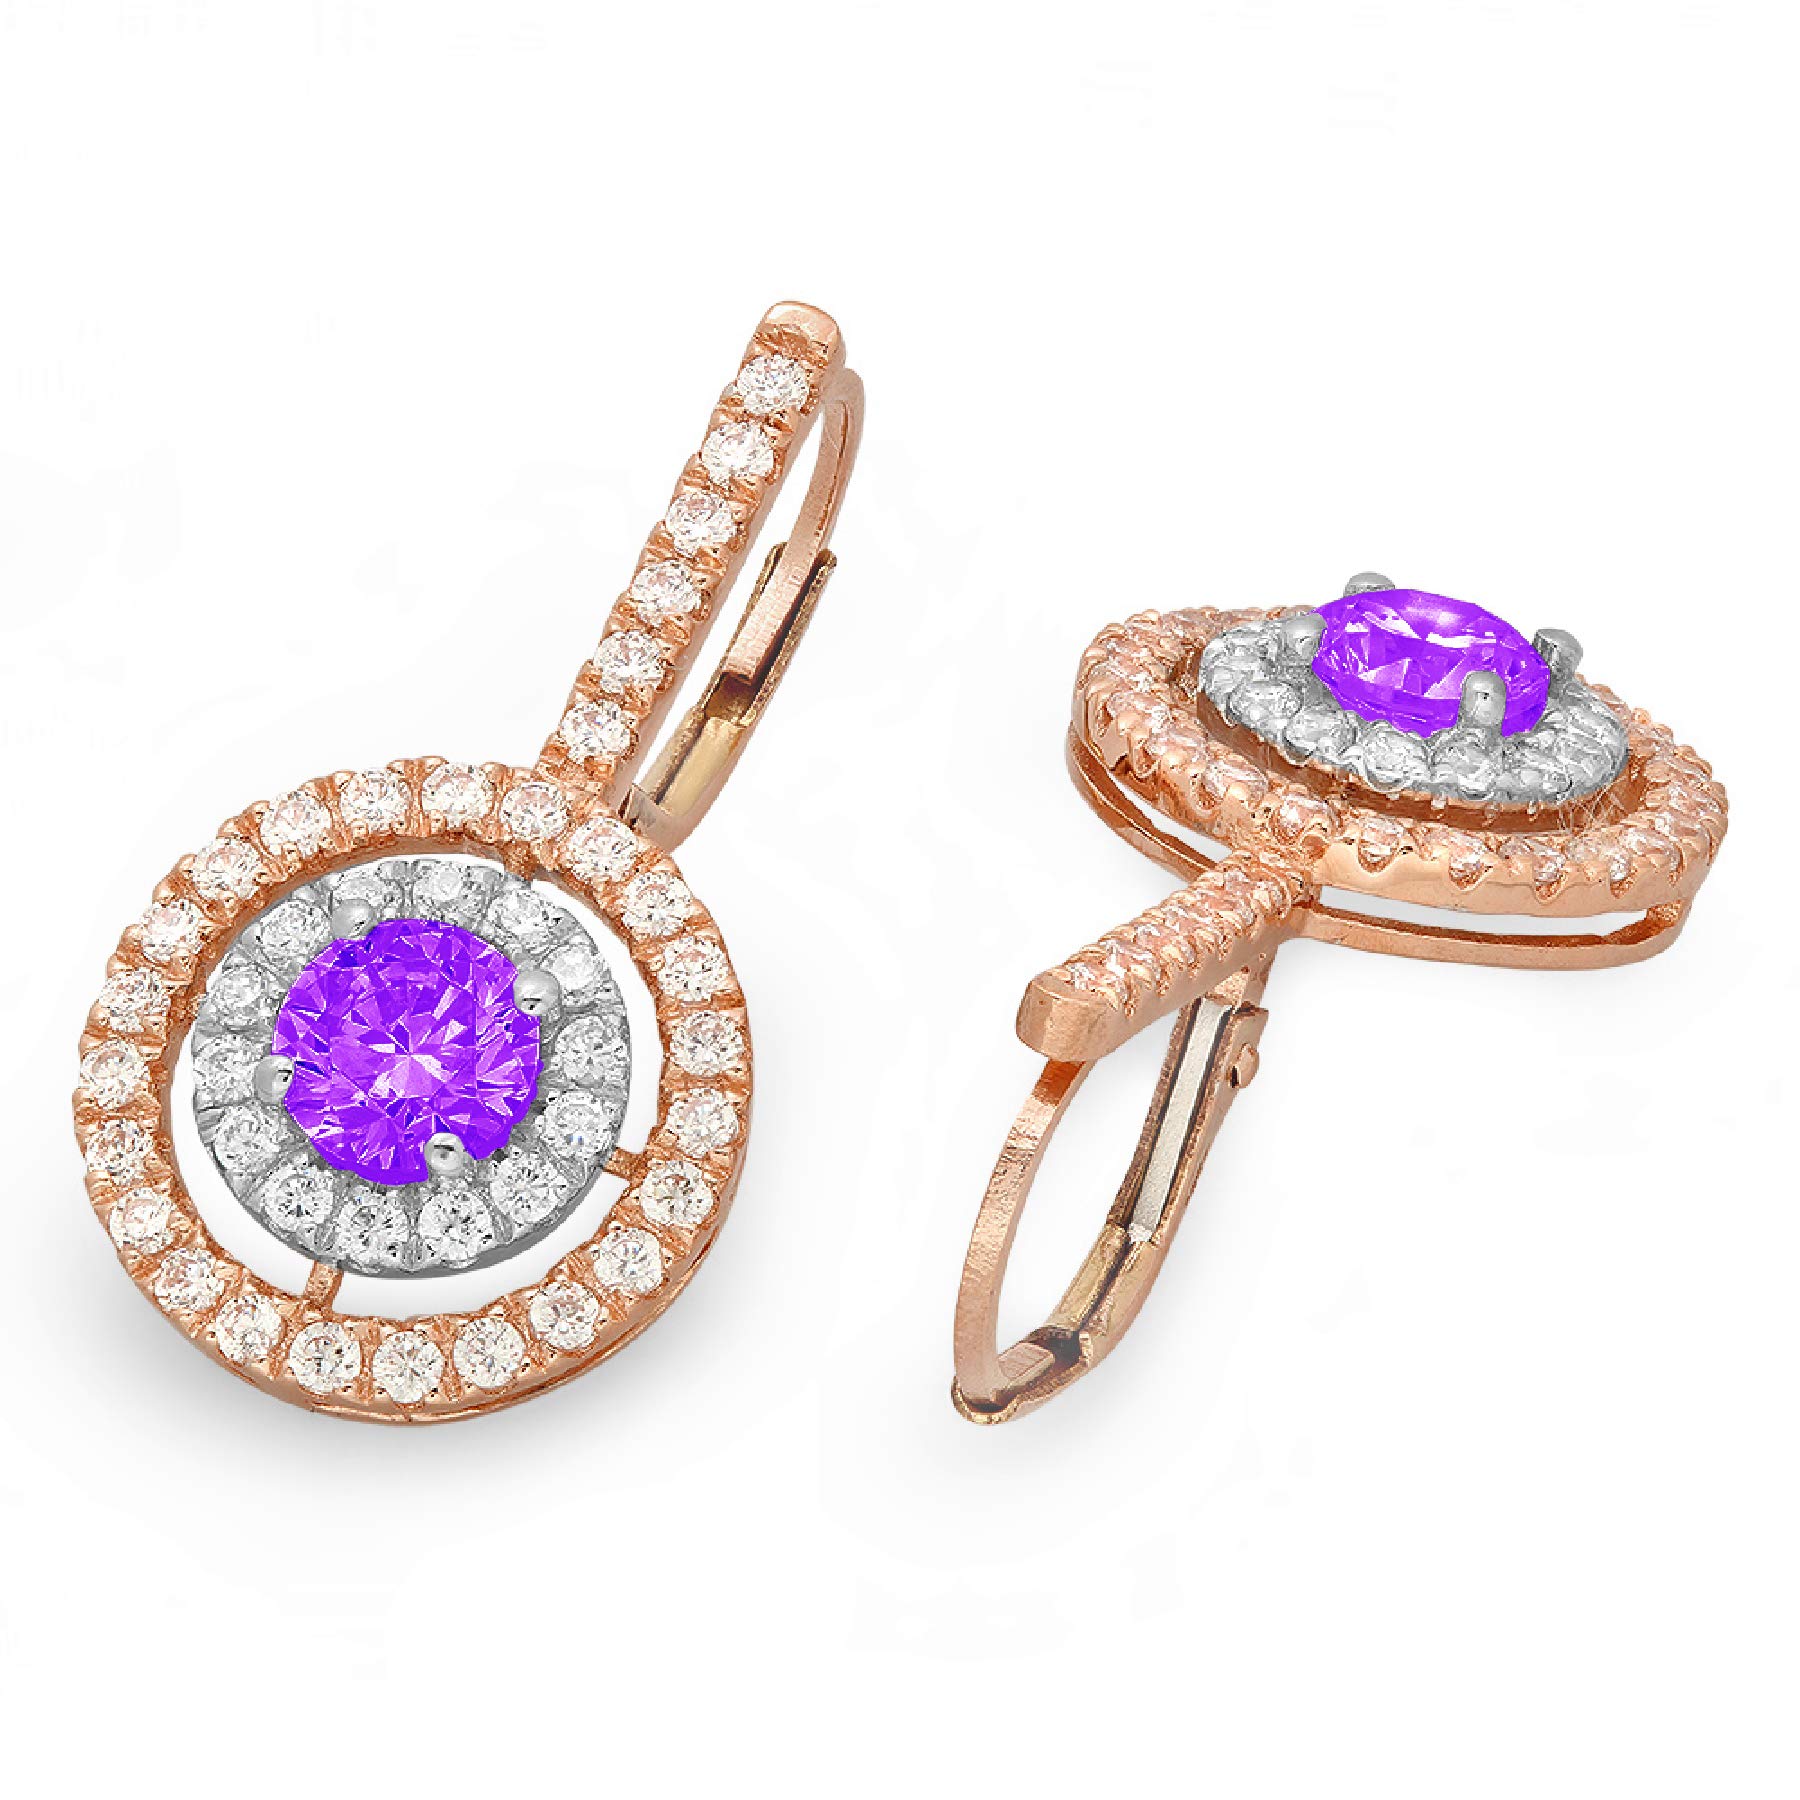 Clara Pucci 2.5 ct Brilliant Round Cut Double Halo Solitaire Genuine Flawless Natural Purple Amethyst Gemstone Pair of Lever back Drop Dangle Earrings Solid 18K 2 tone Gold